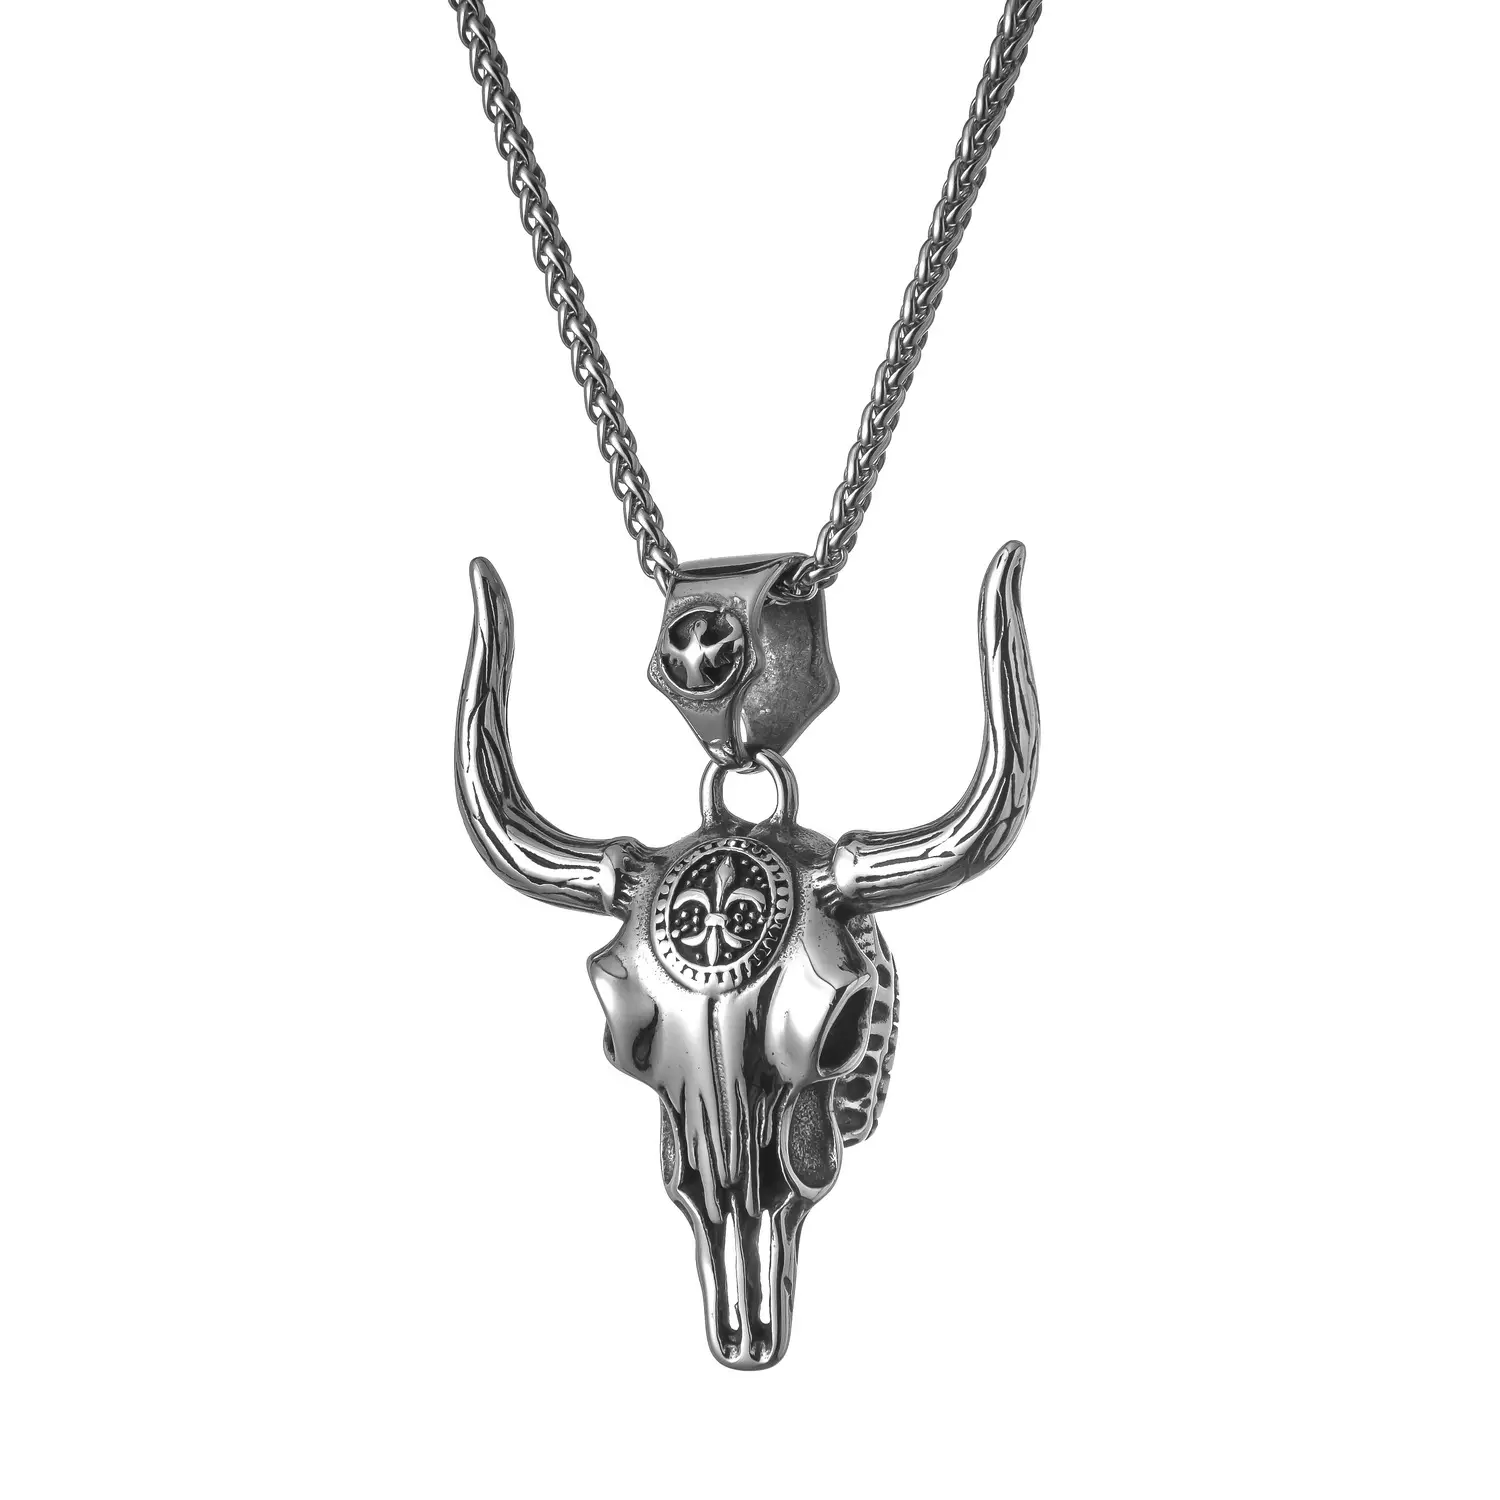 Fashionable personality stainless steel casting necklace men's zodiac retro rock and roll bull head pendant necklace